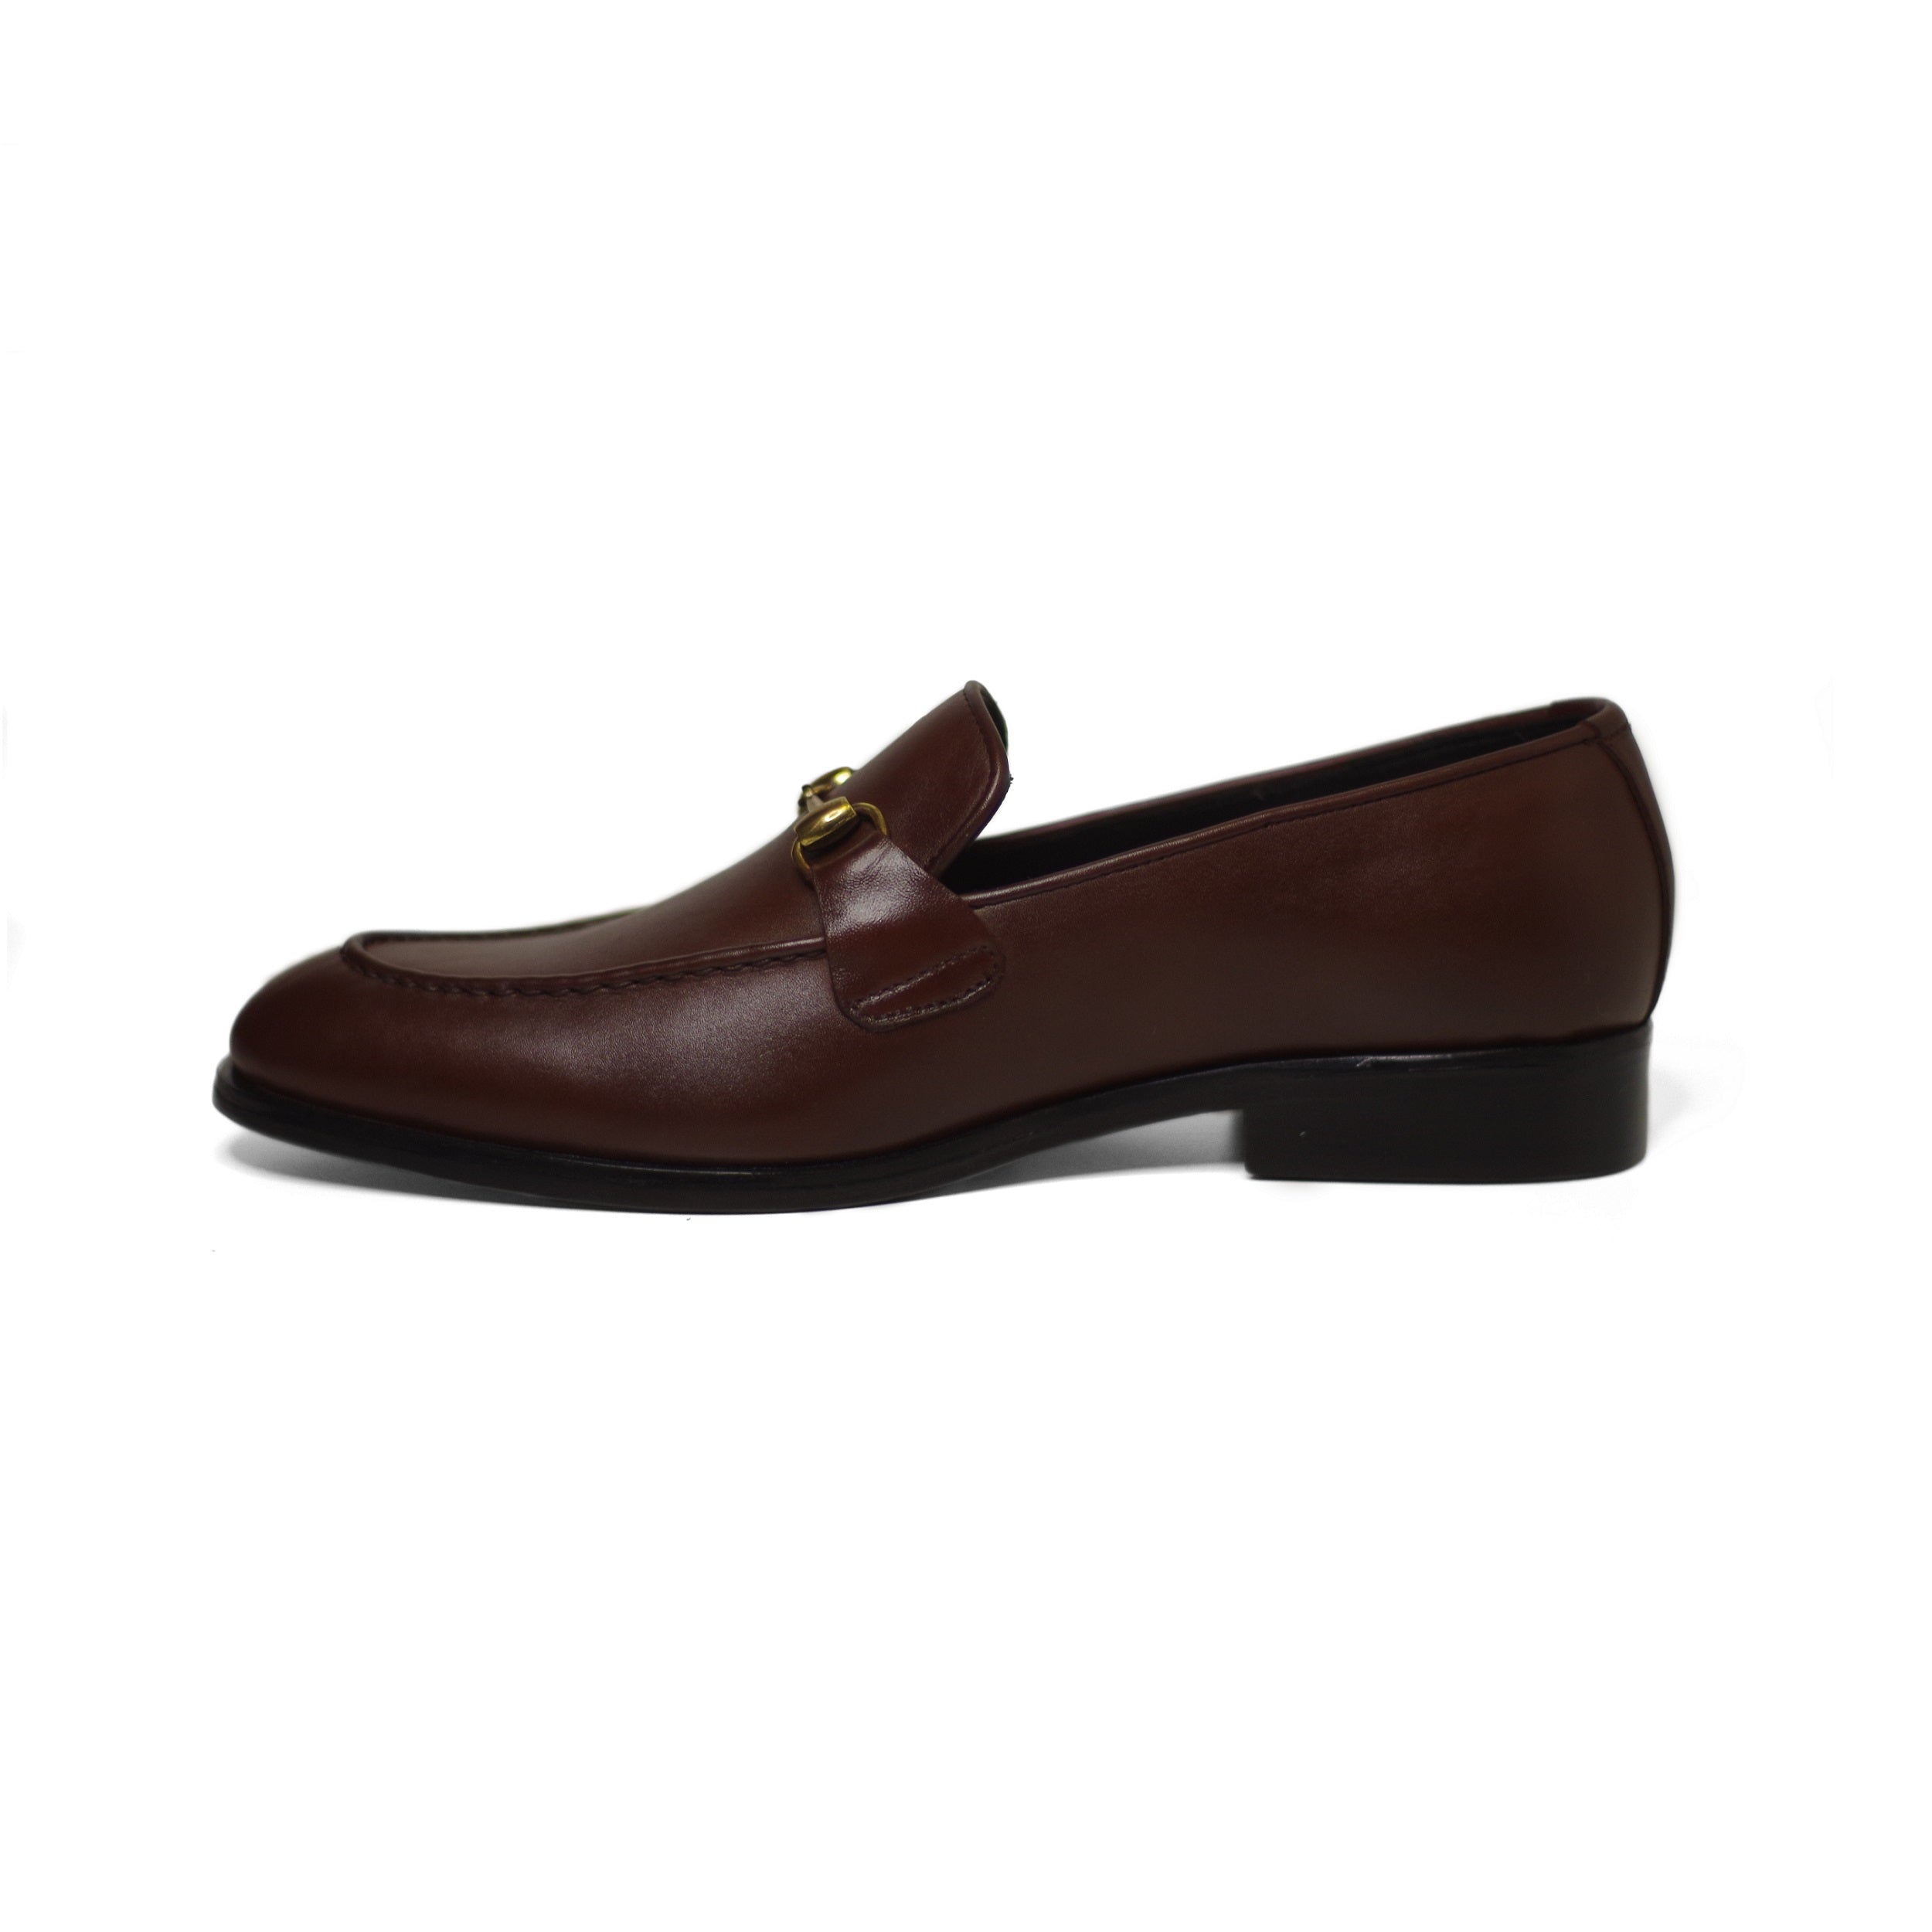 Black & Brown Elegant Design With Classic Buckle Hand-Crafted Vogue Loafers/Shoes For Men